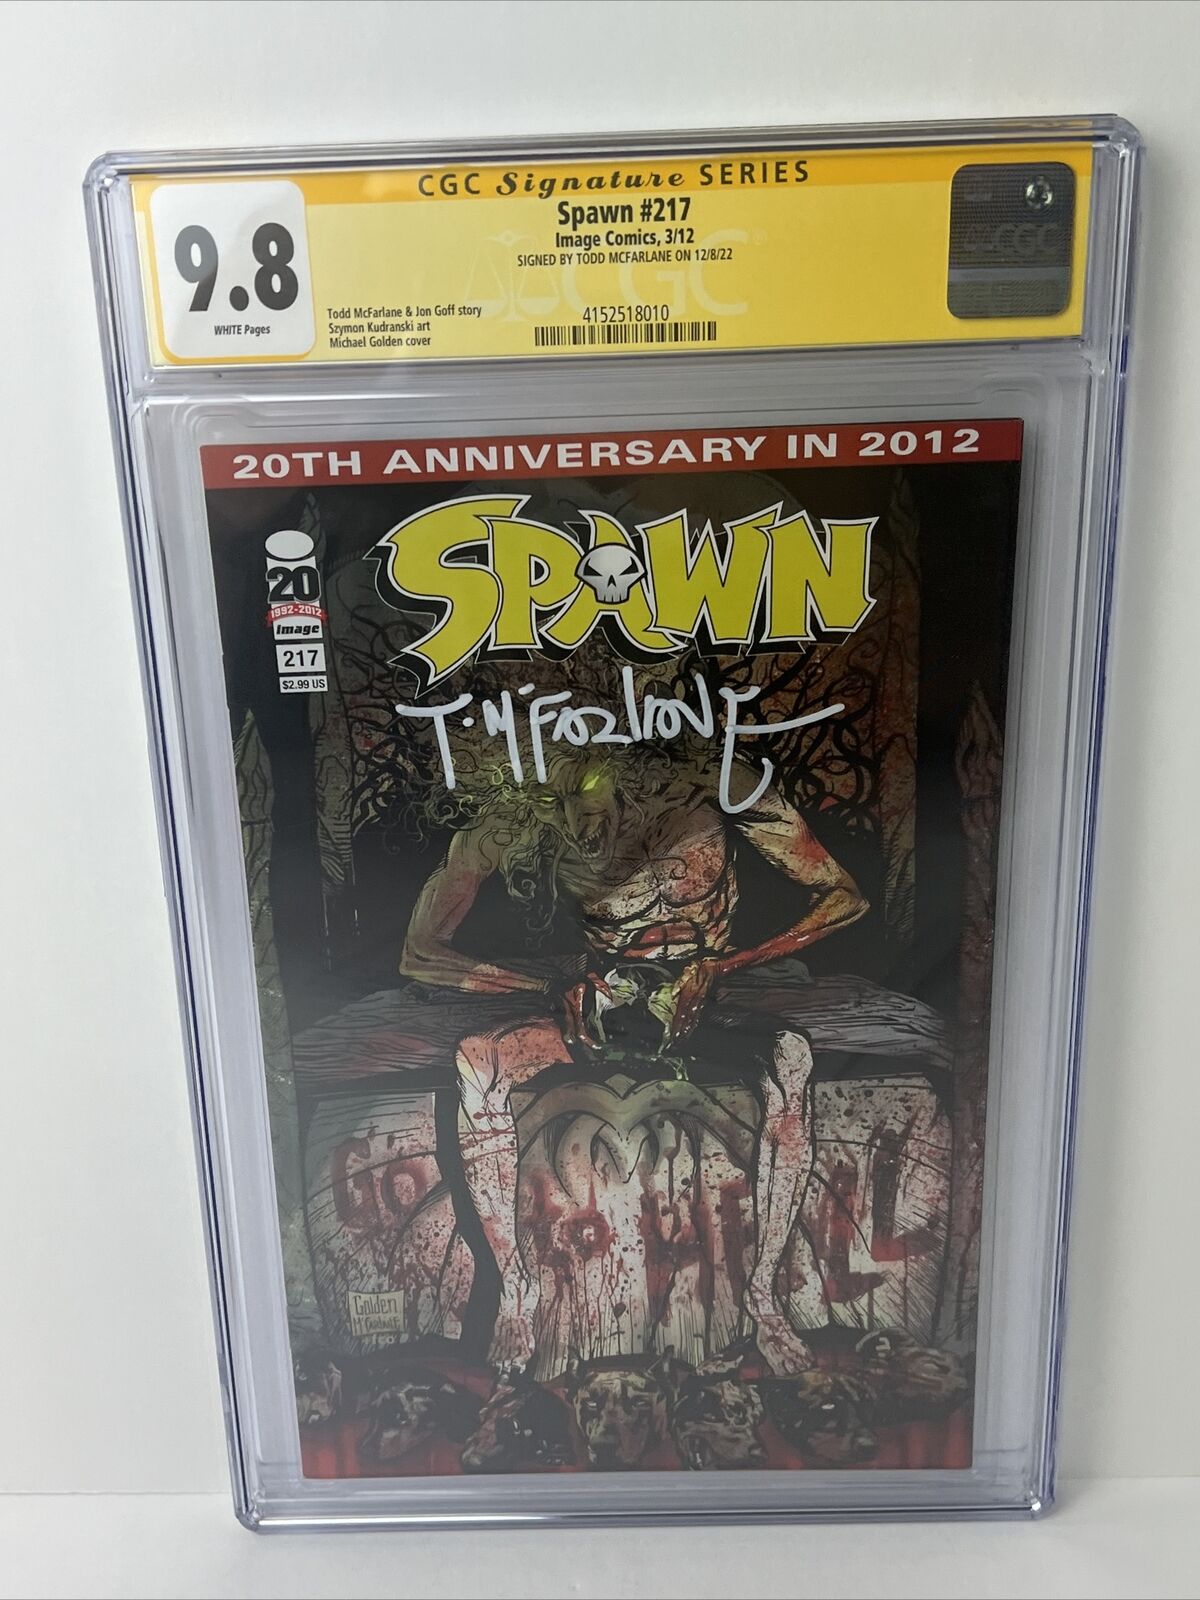 Spawn #217 Image Comics 2012 CGC 9.8 SS Signed By Todd McFarlane